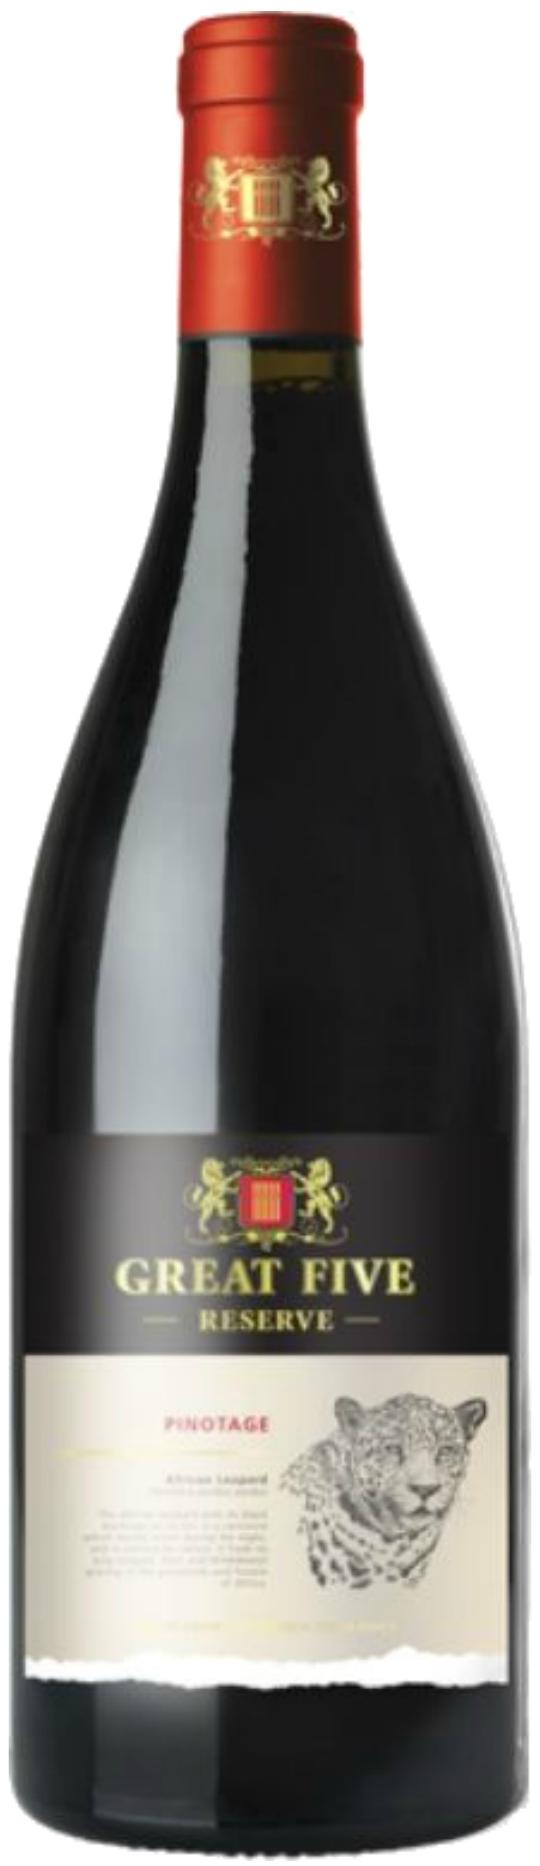 Stellenview Great Five oHG Wines Südafrika, Curry Western Cape) Pinotage Premium Reserve (Rotwein, 